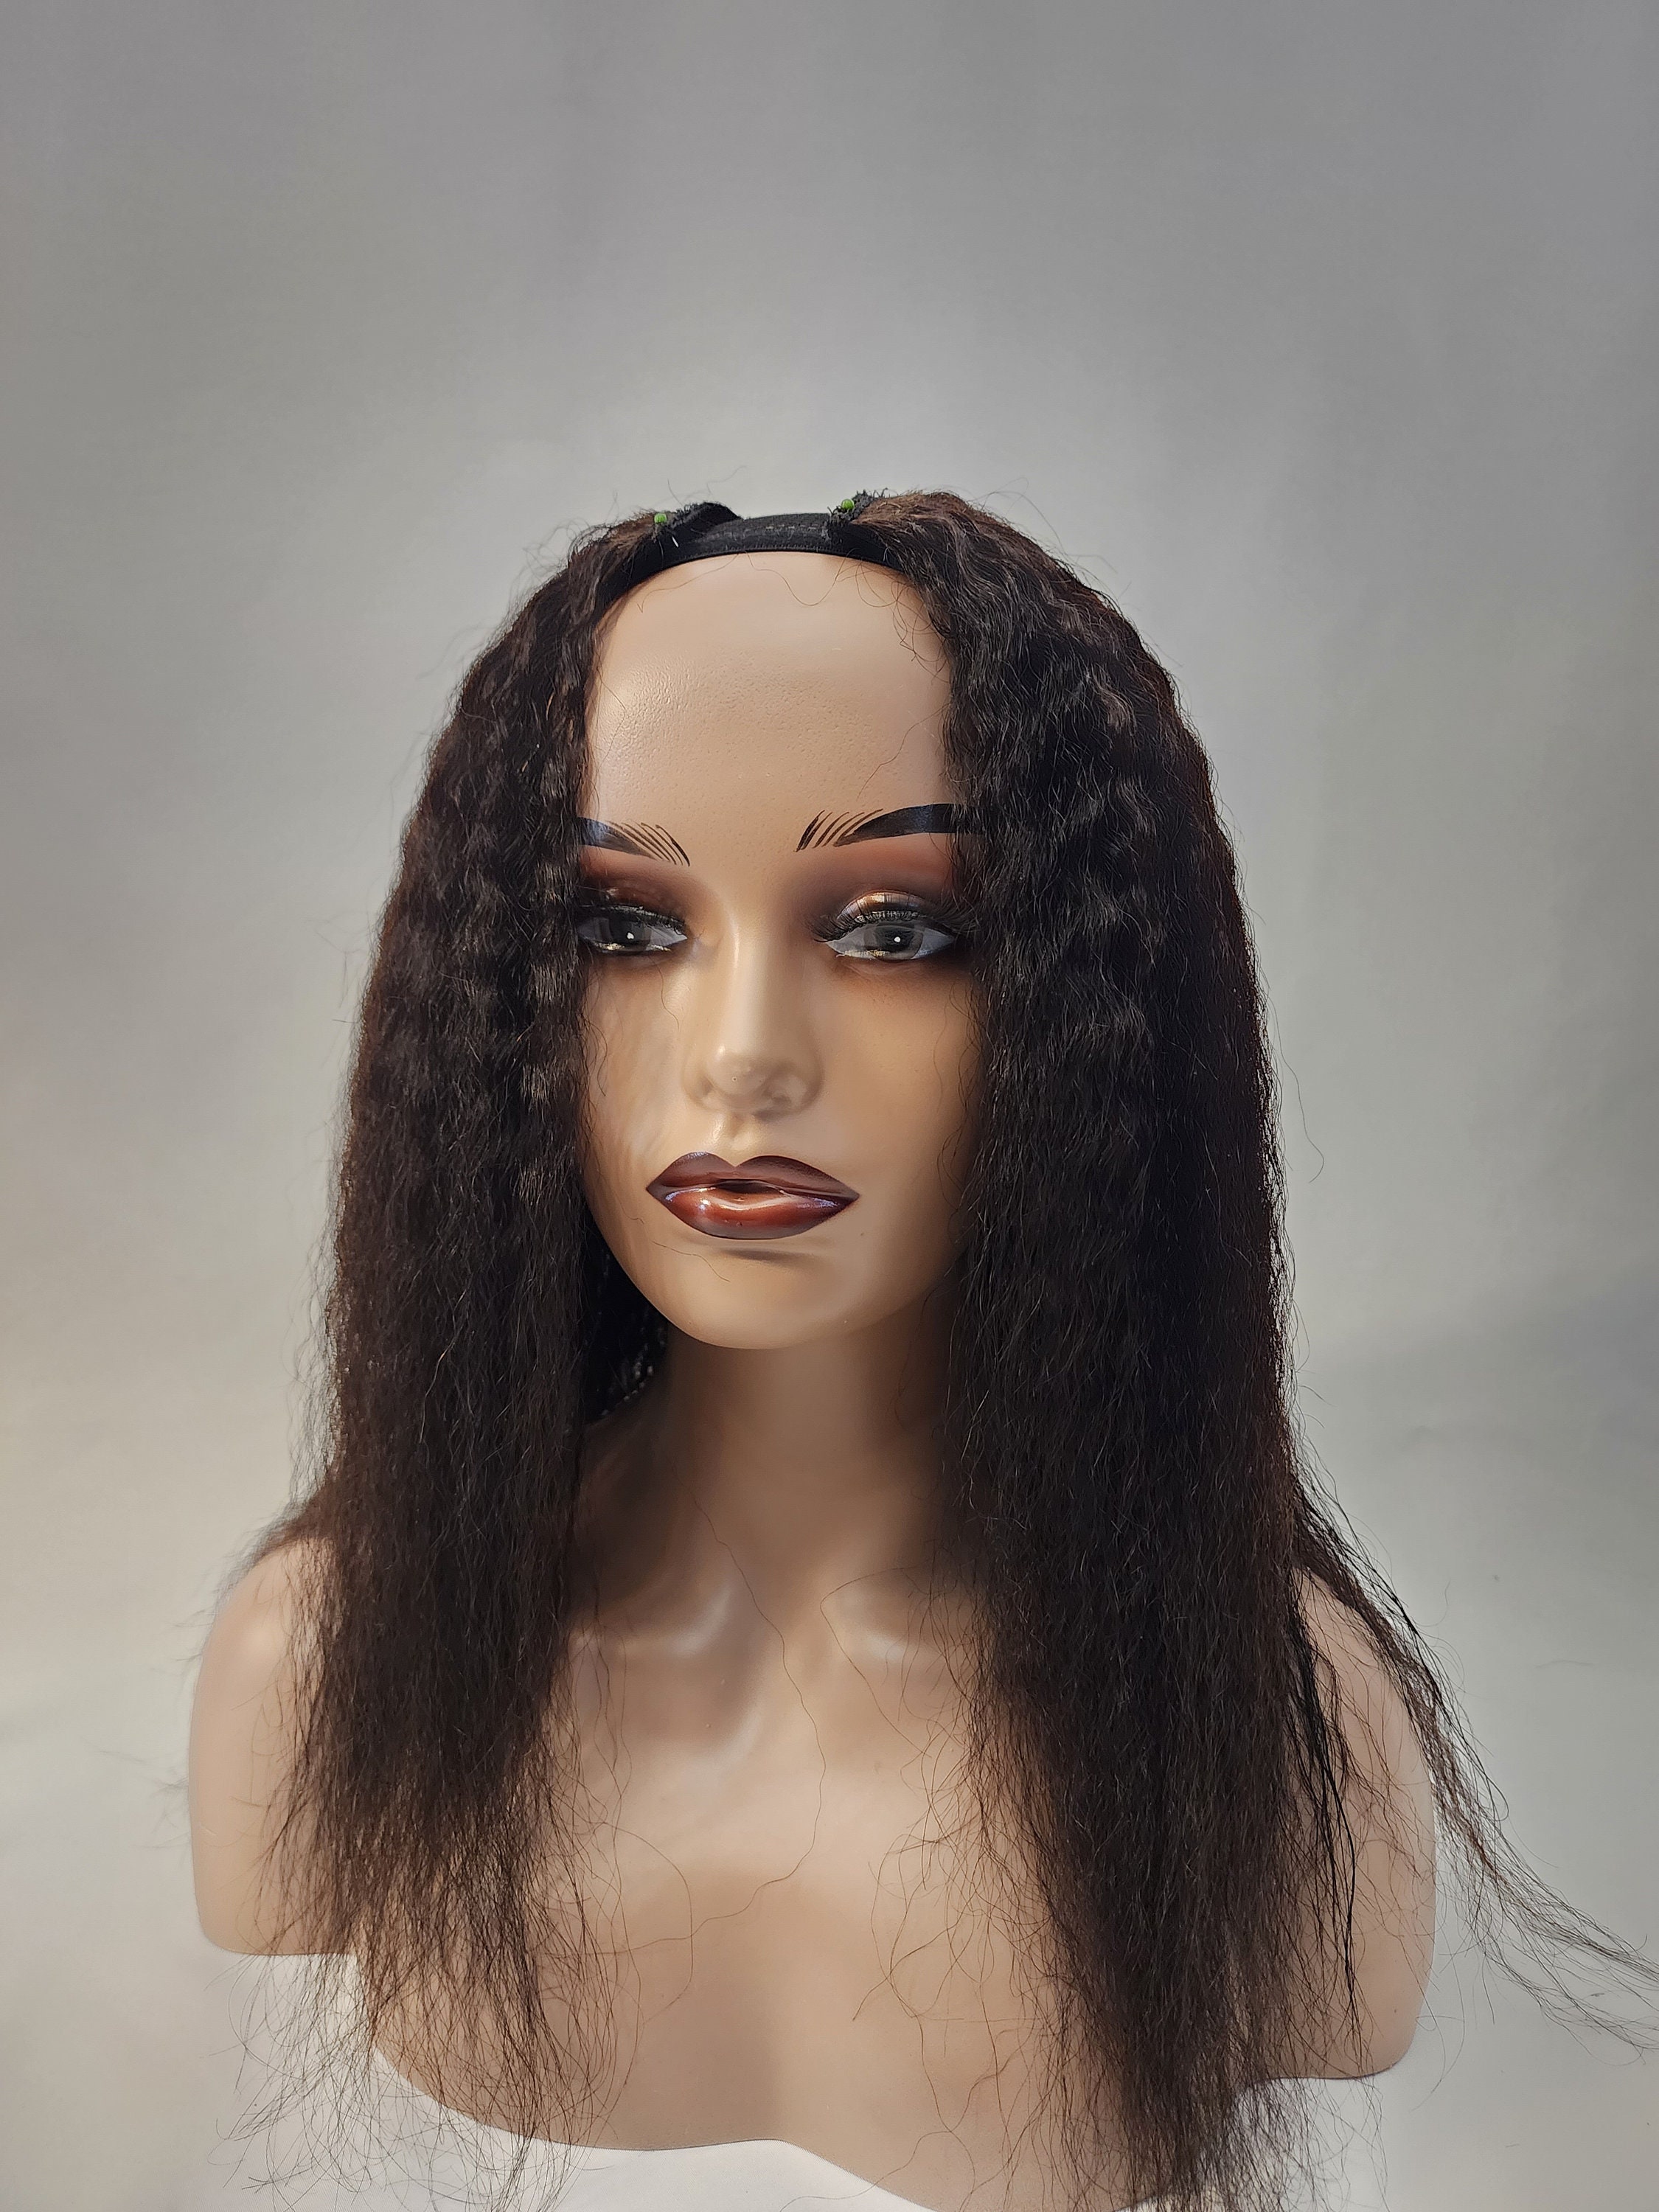 Charmers cosmetics - Ventilating Needles and Lace Mesh now available. Make  your own Closures and Lace Front wigs with these tool kit.